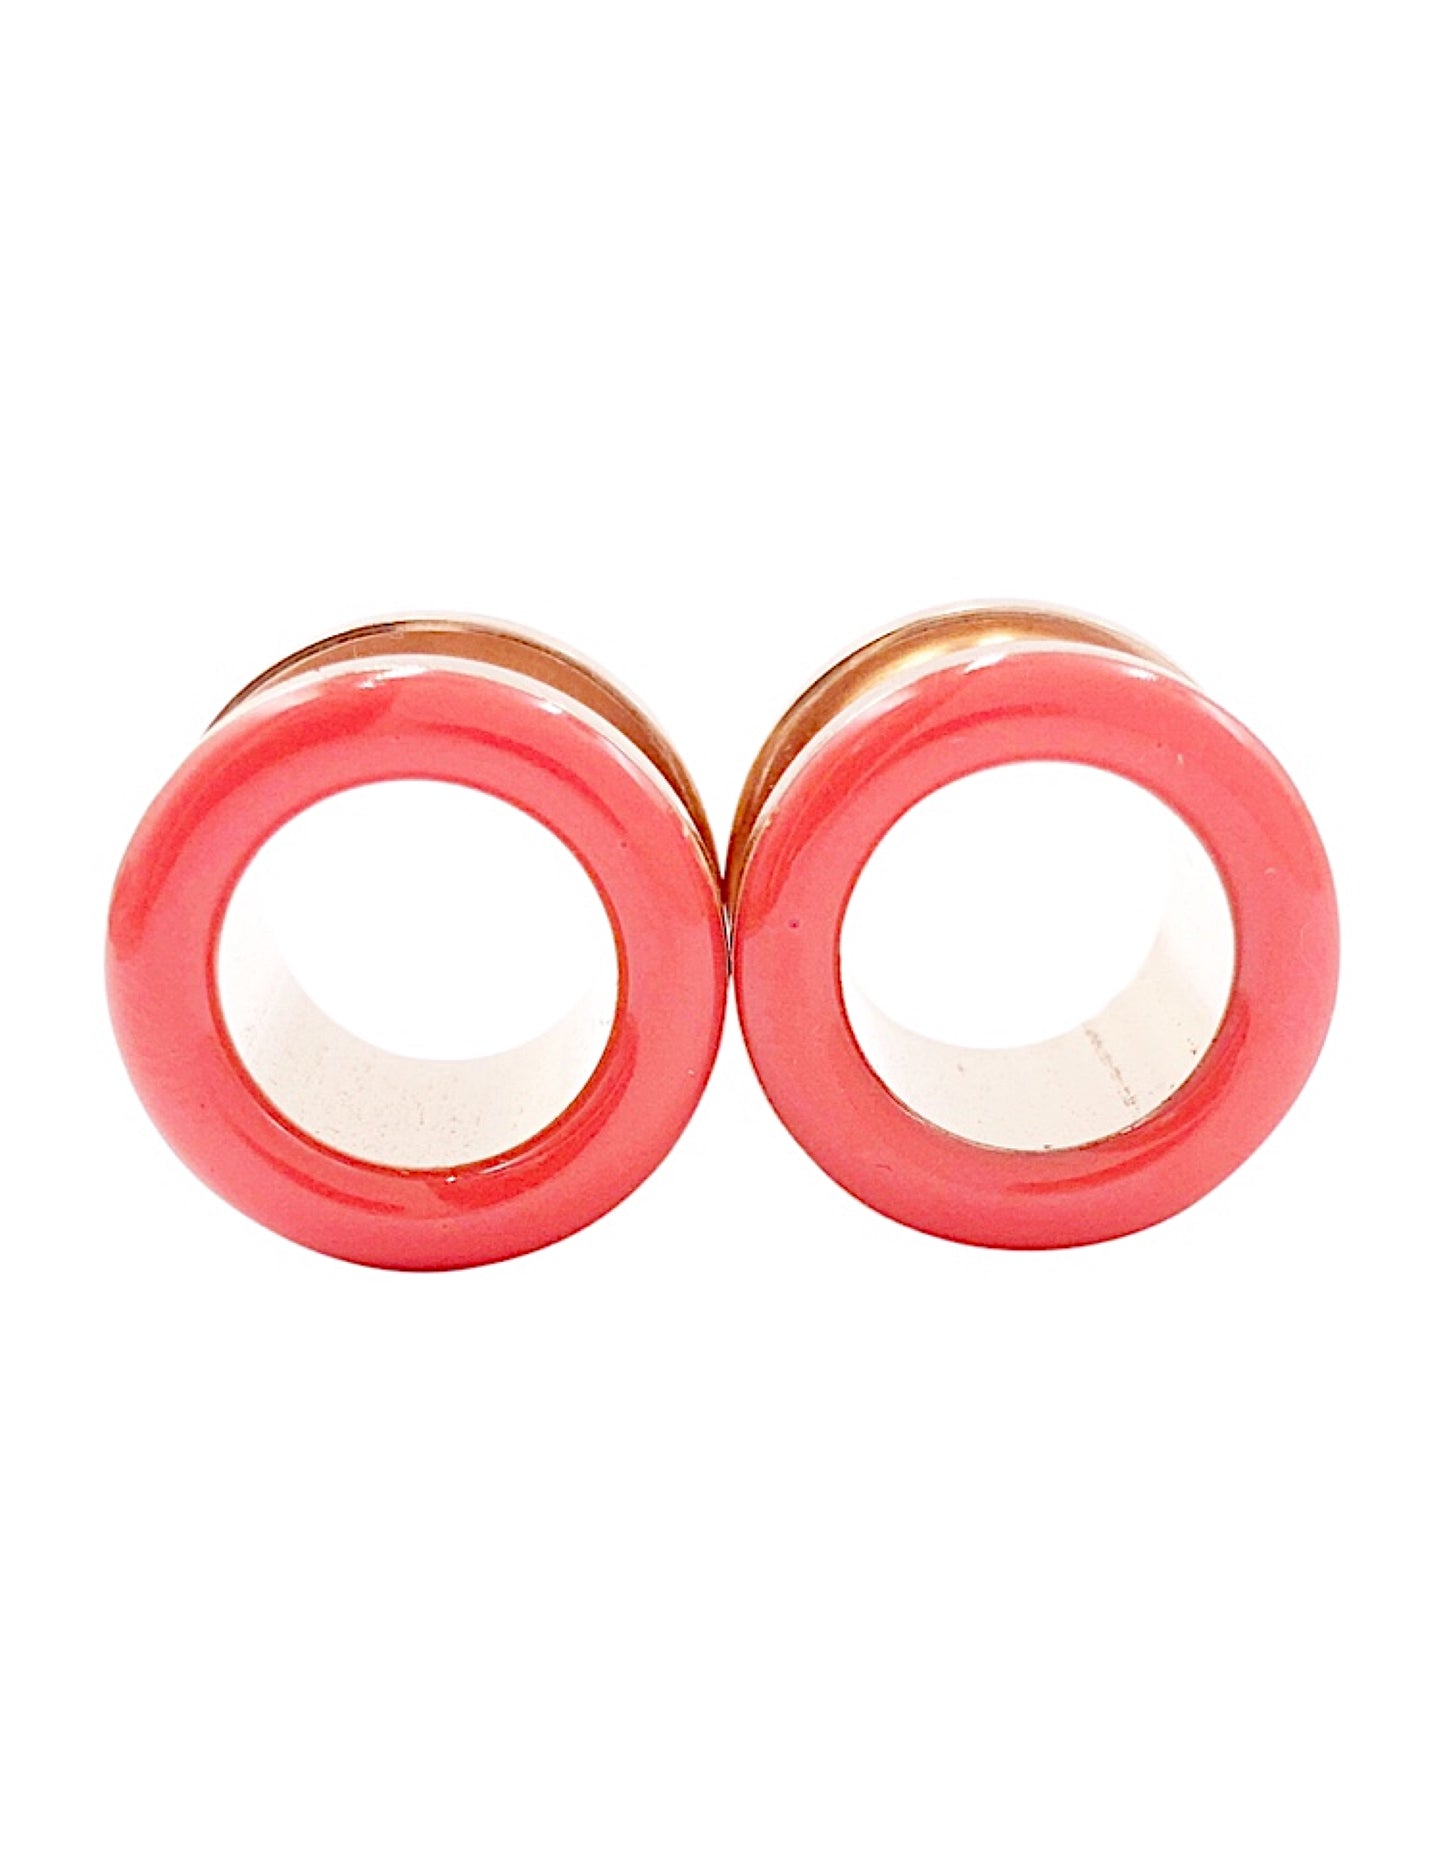 Coral Gloss Tunnel Plugs